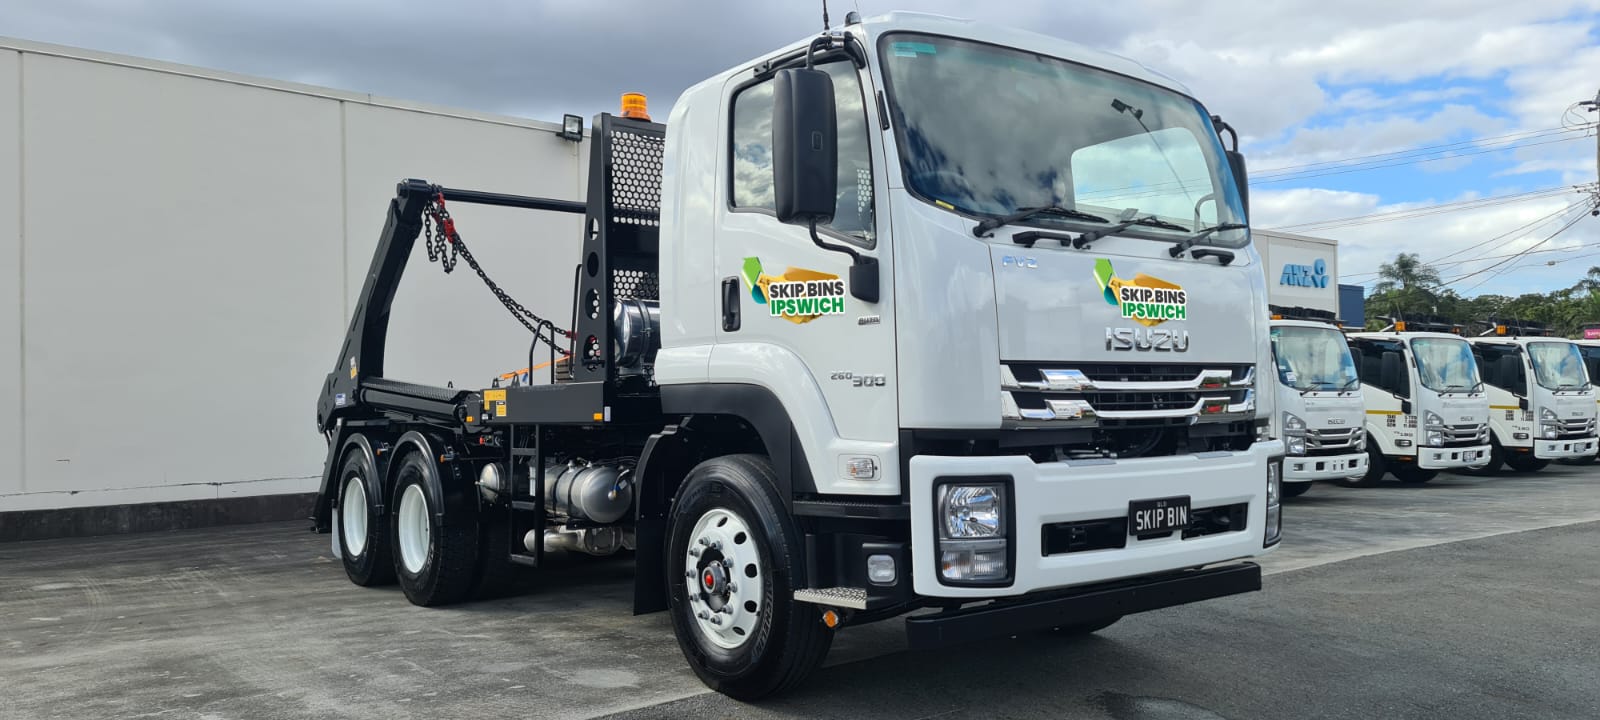 Skip Bin Hire Leichhardt Is The Best Solution To Solve Your Waste Management Issue - Read News Blog